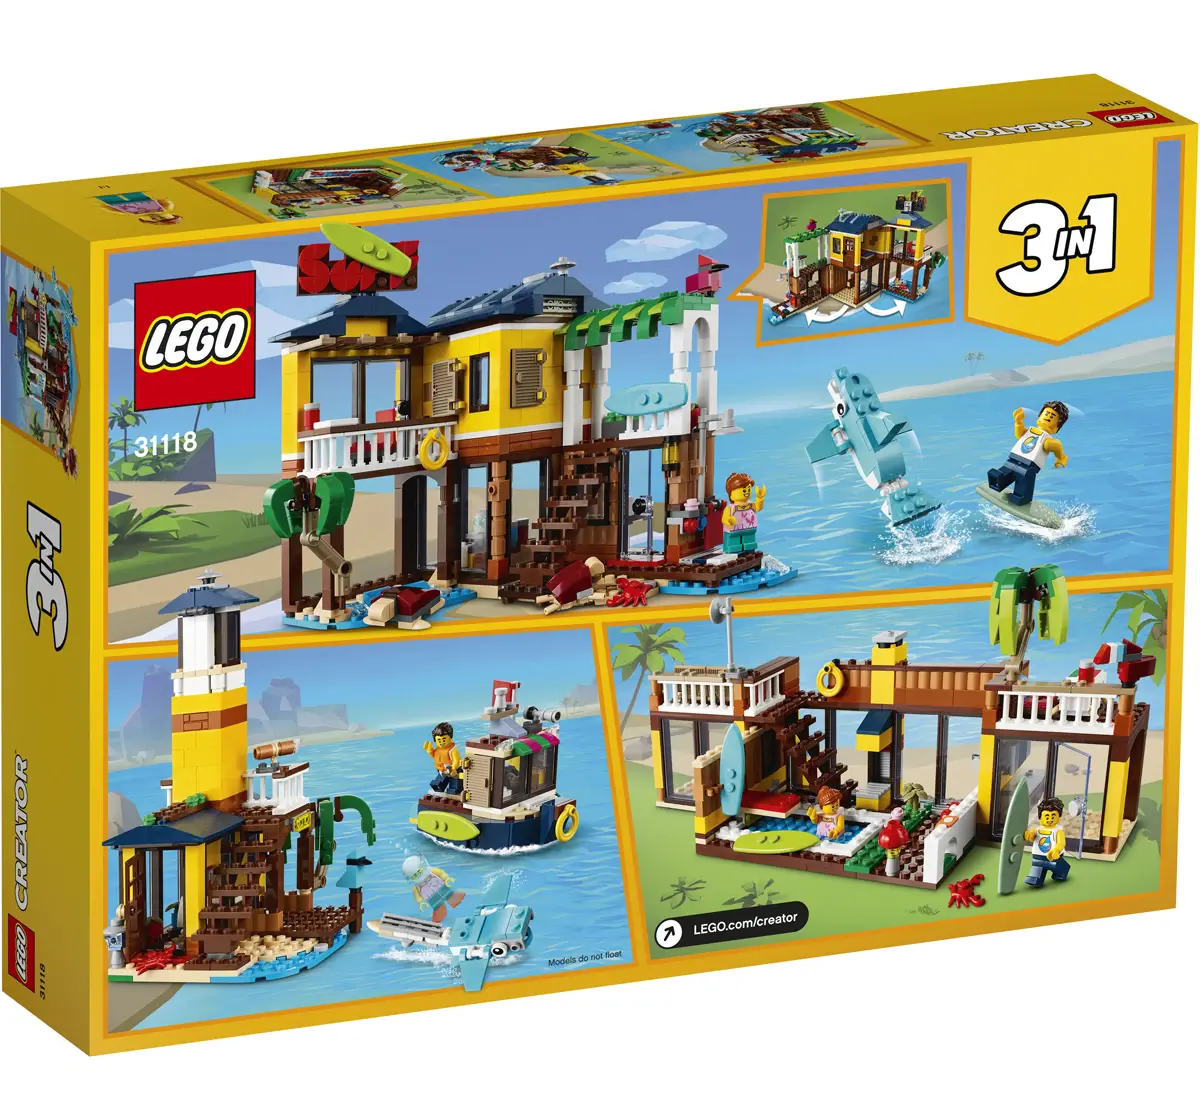 Creator 3in1 Surfer Beach House Building Kit by Lego Featuring Beach Hut and Animal Toys (564 Pieces)